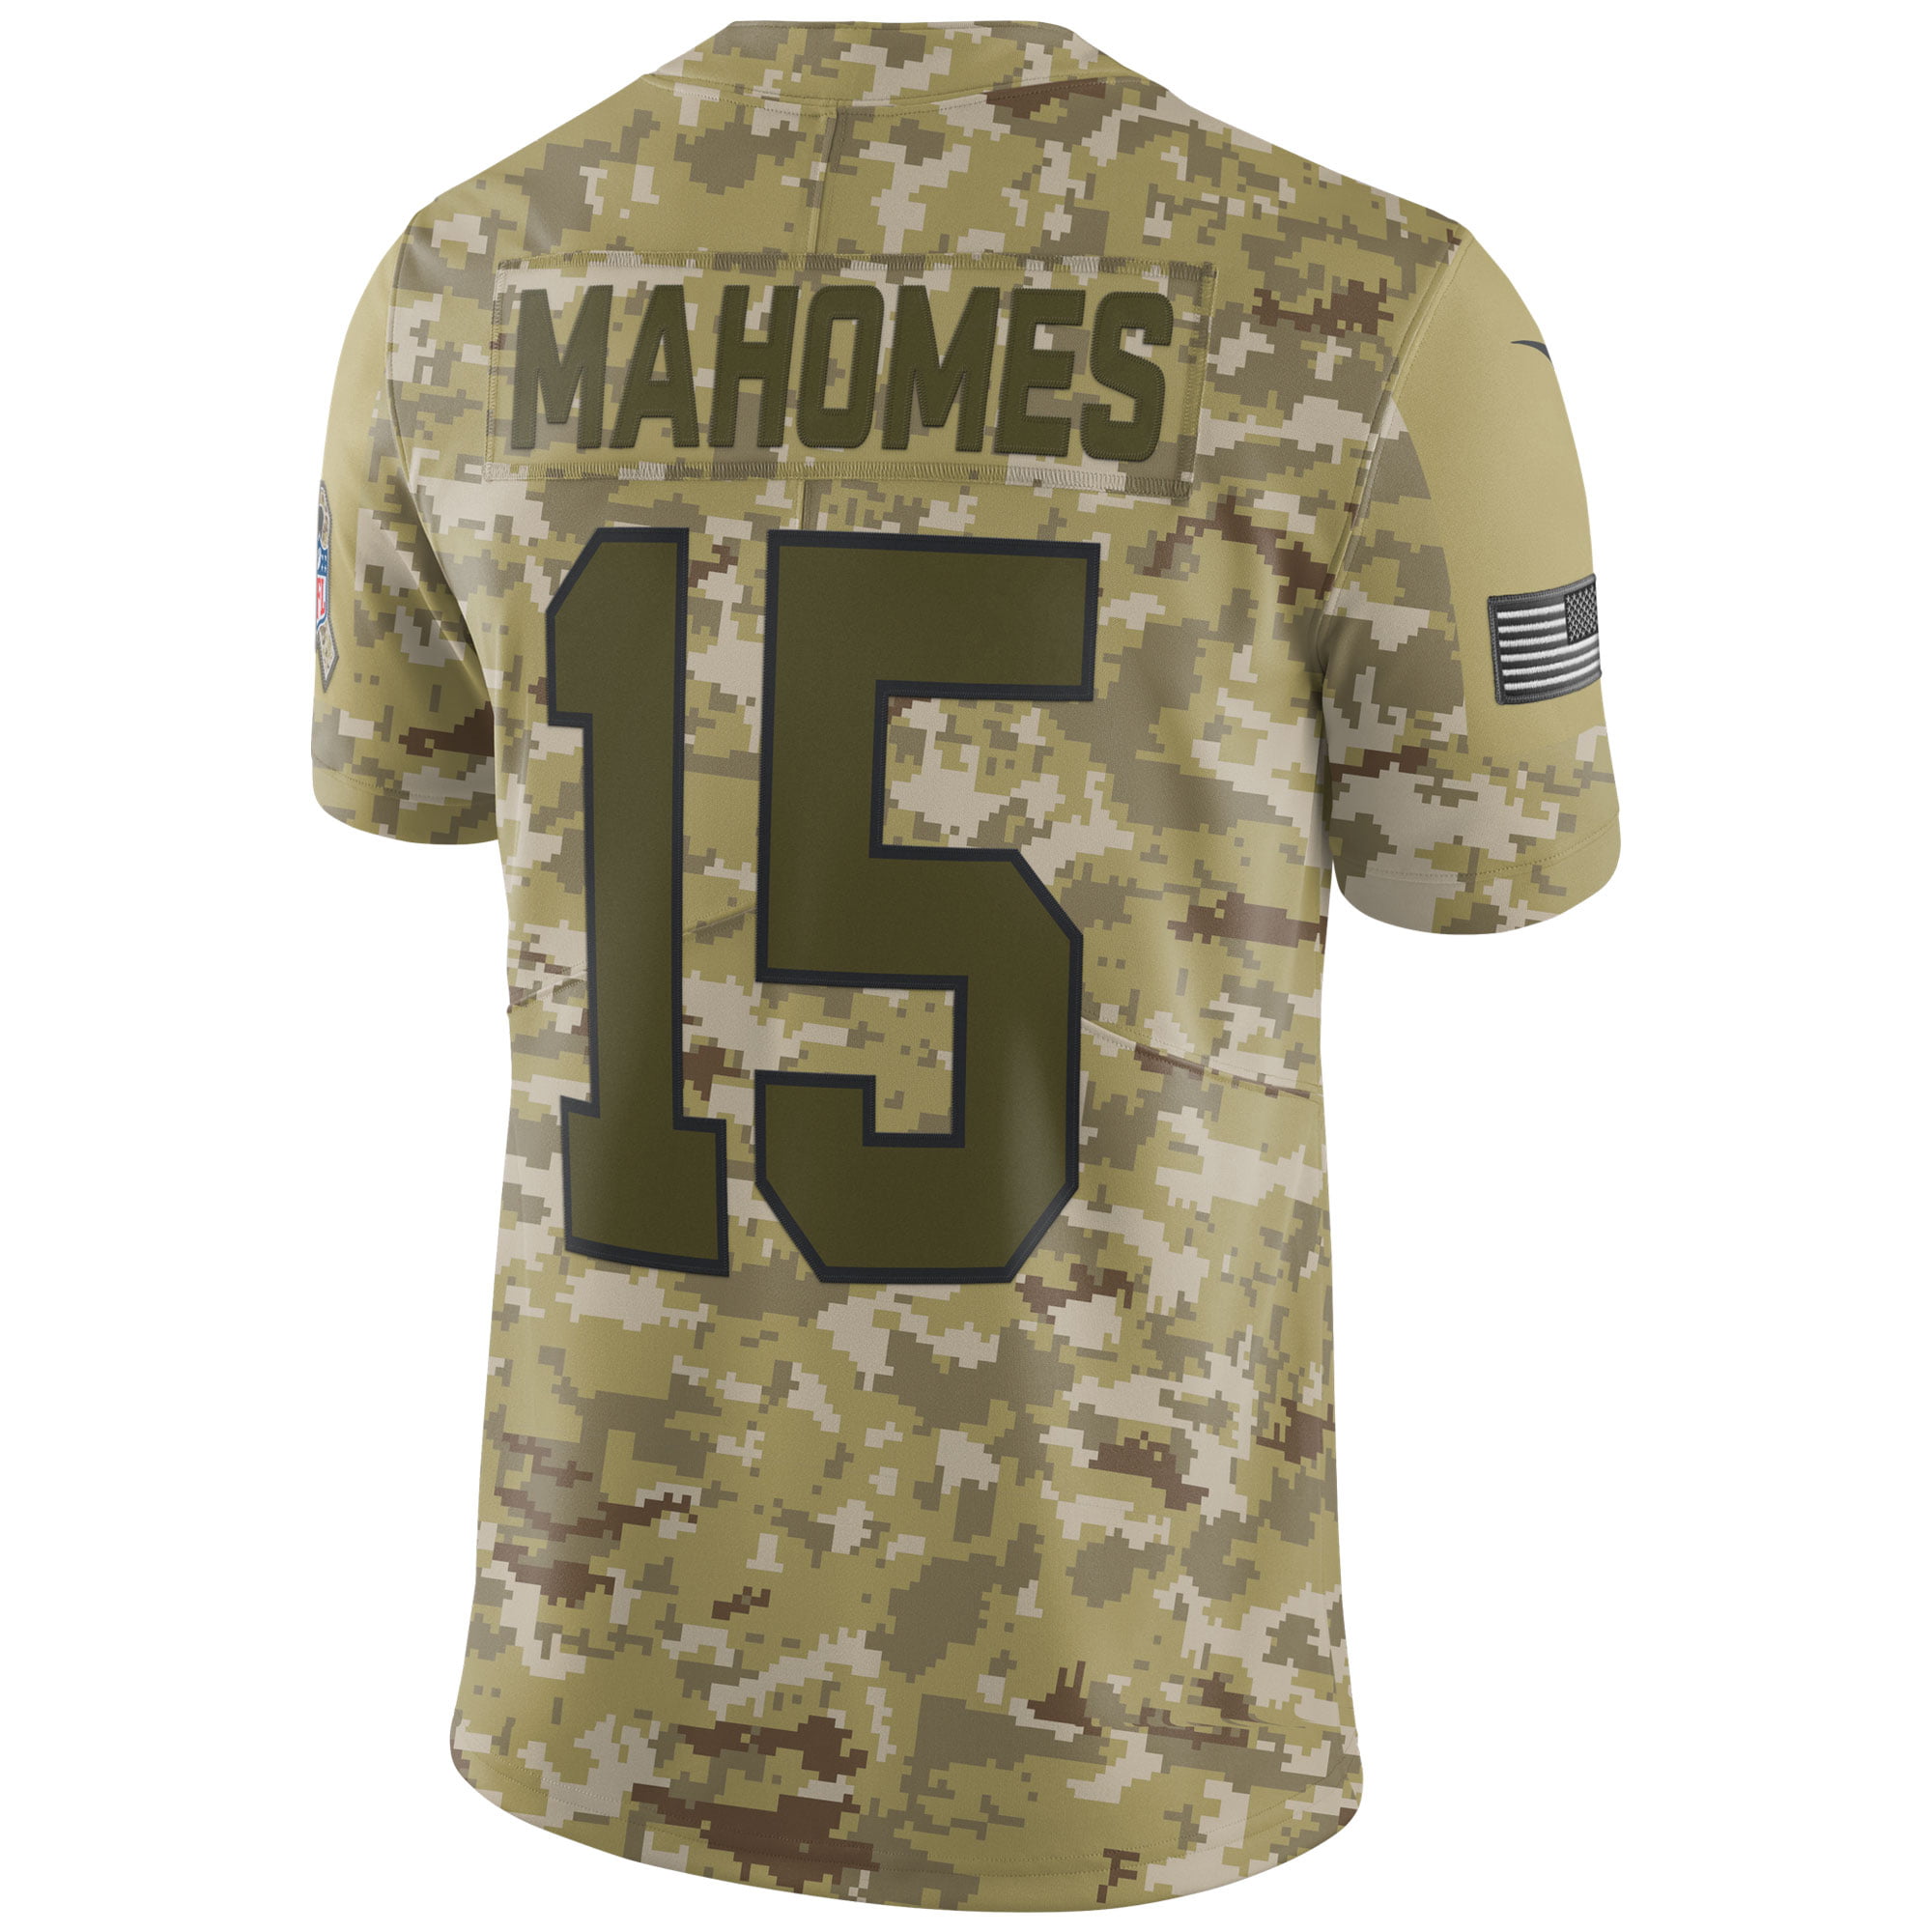 mahomes salute to service jersey